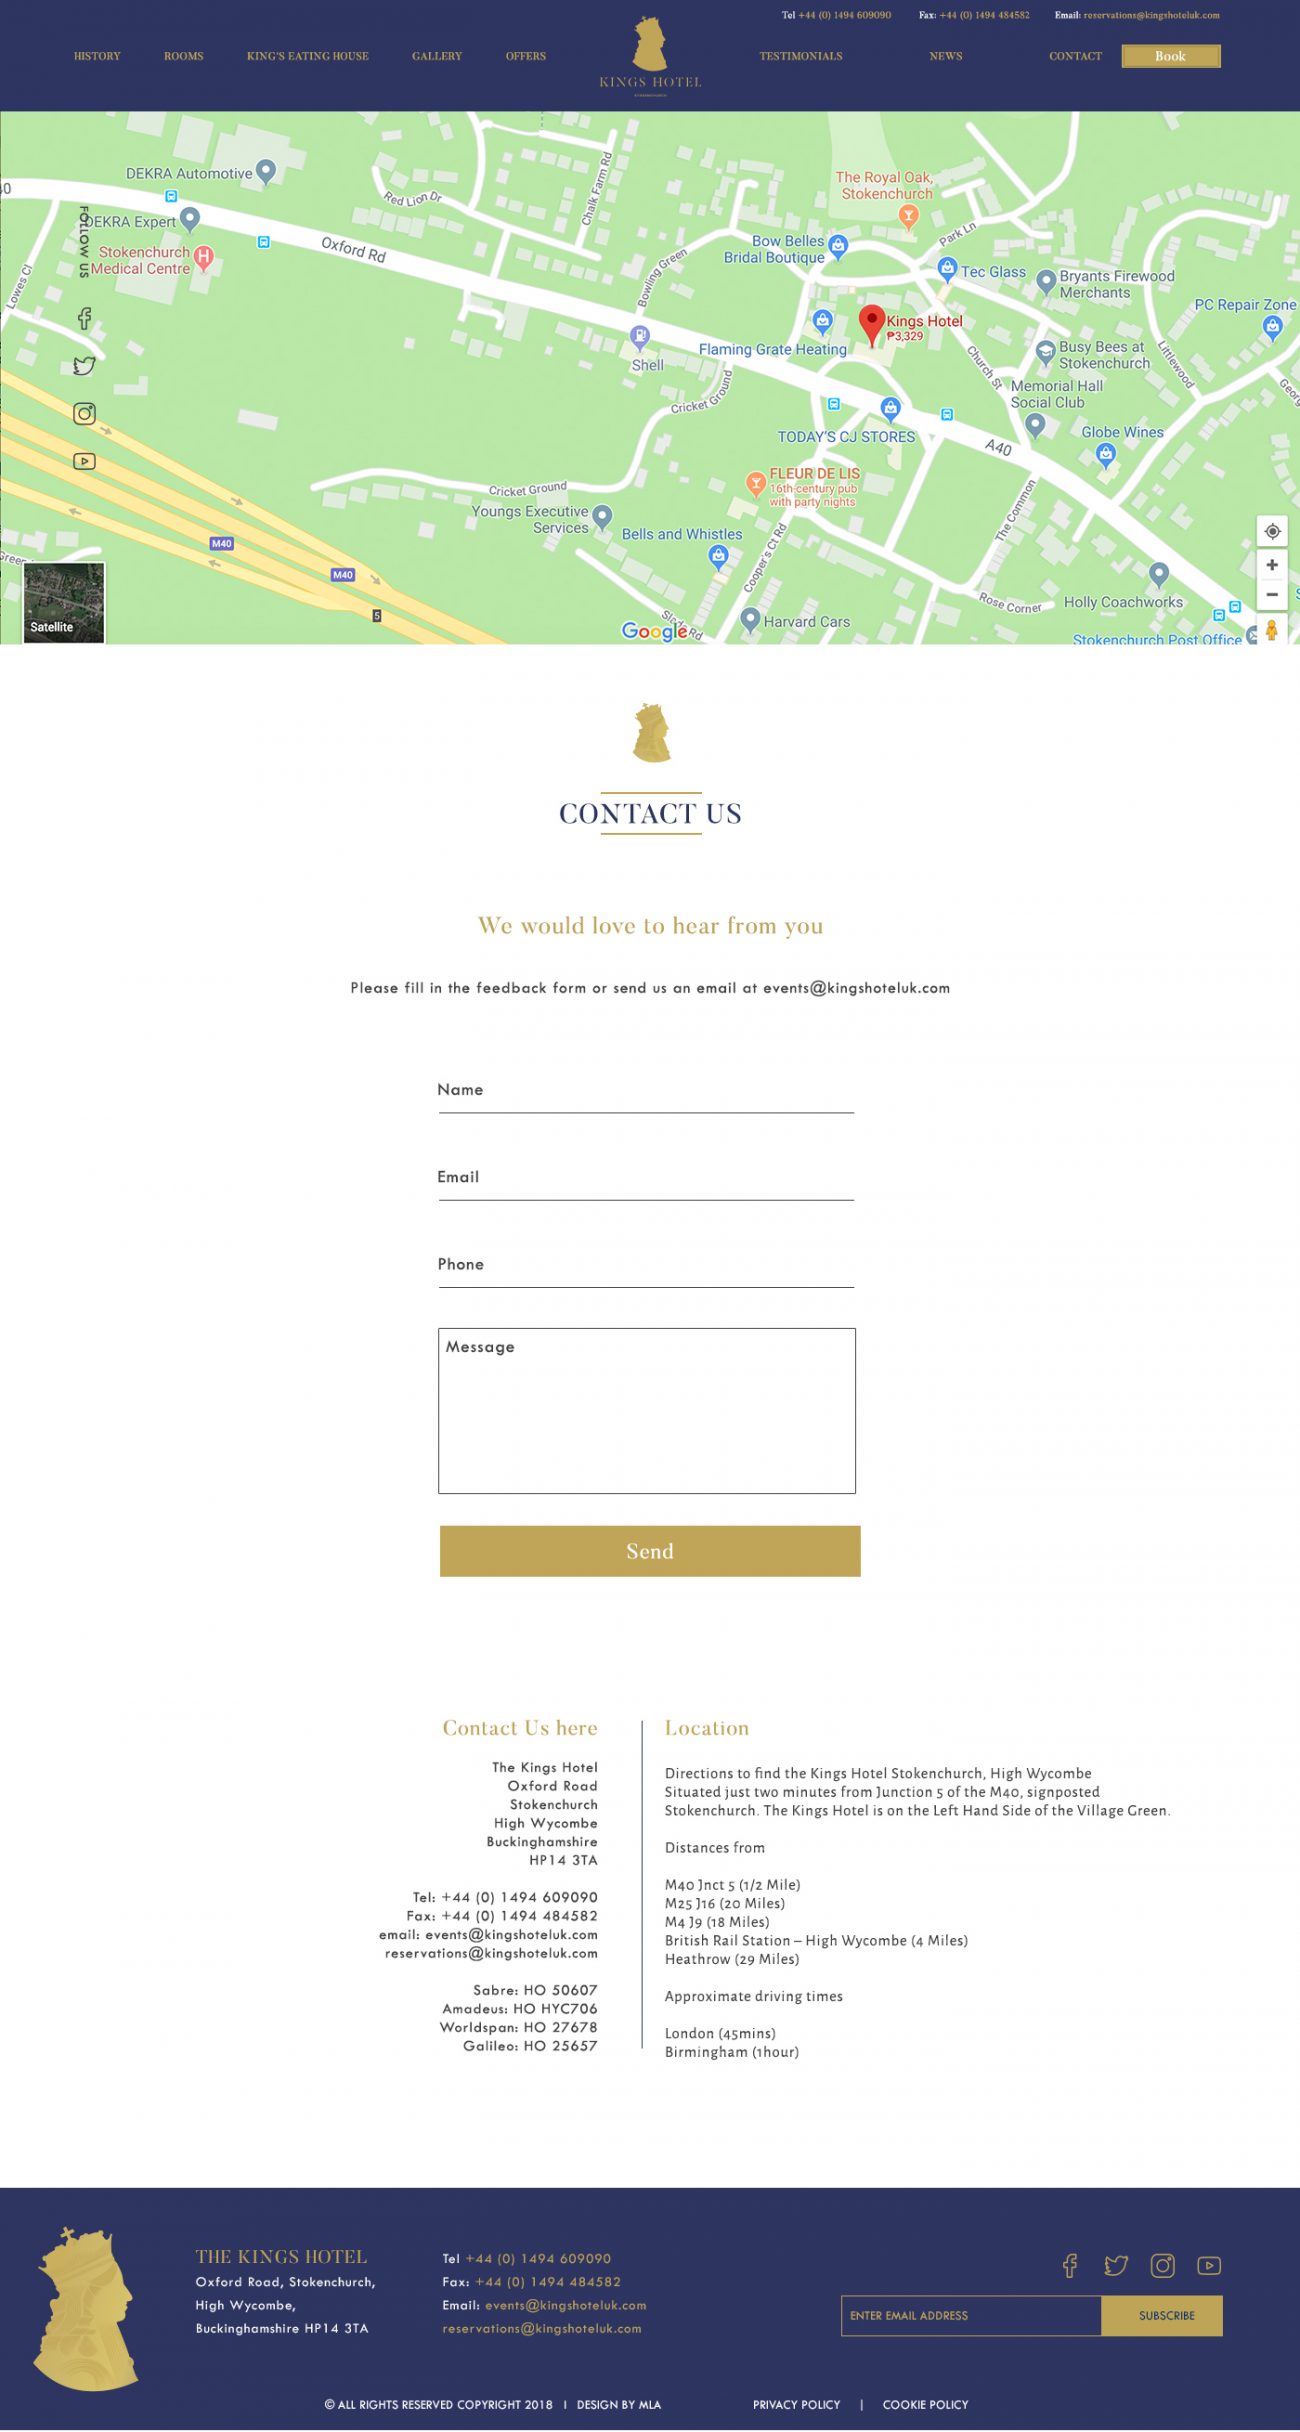 The Kings Hotel contact page - Web design London - web design agency london